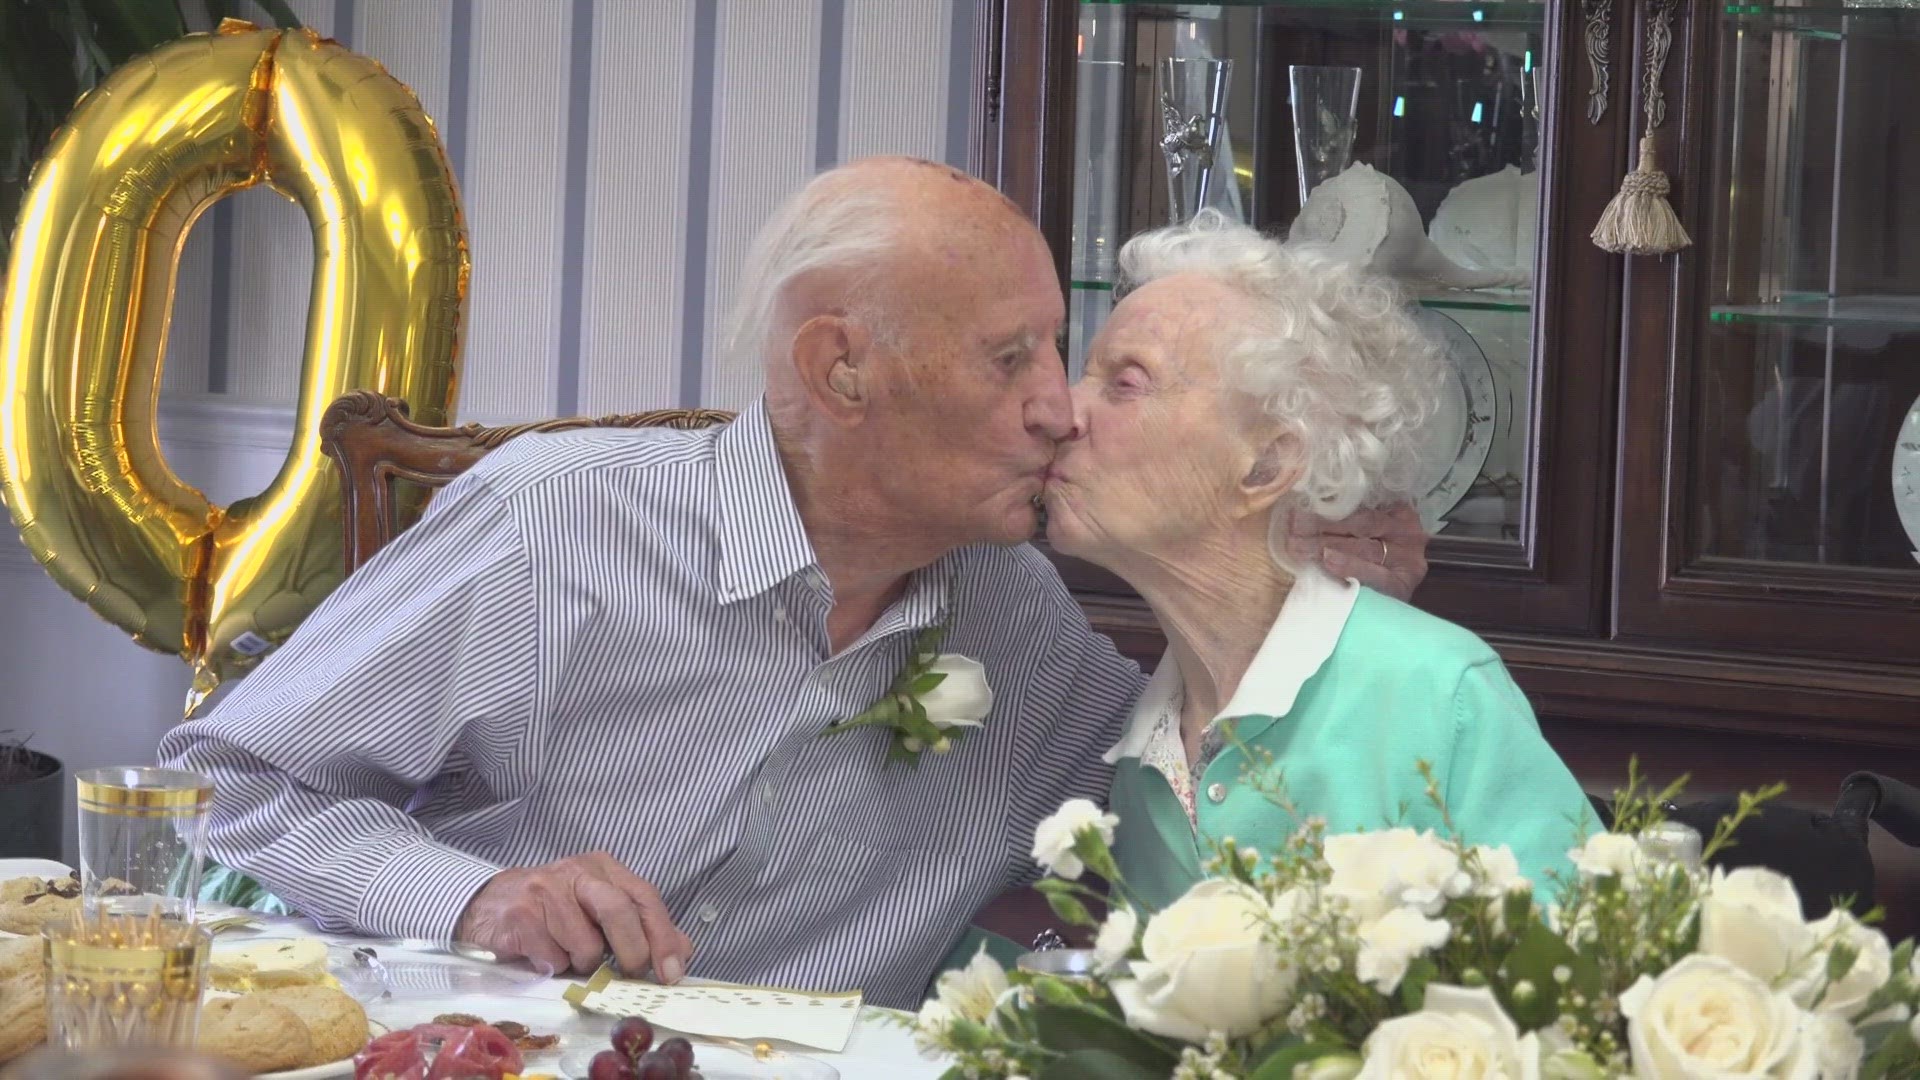 New Year's Day is special for a lot of people, but it's especially so for a couple celebrating 80 years of marriage together.